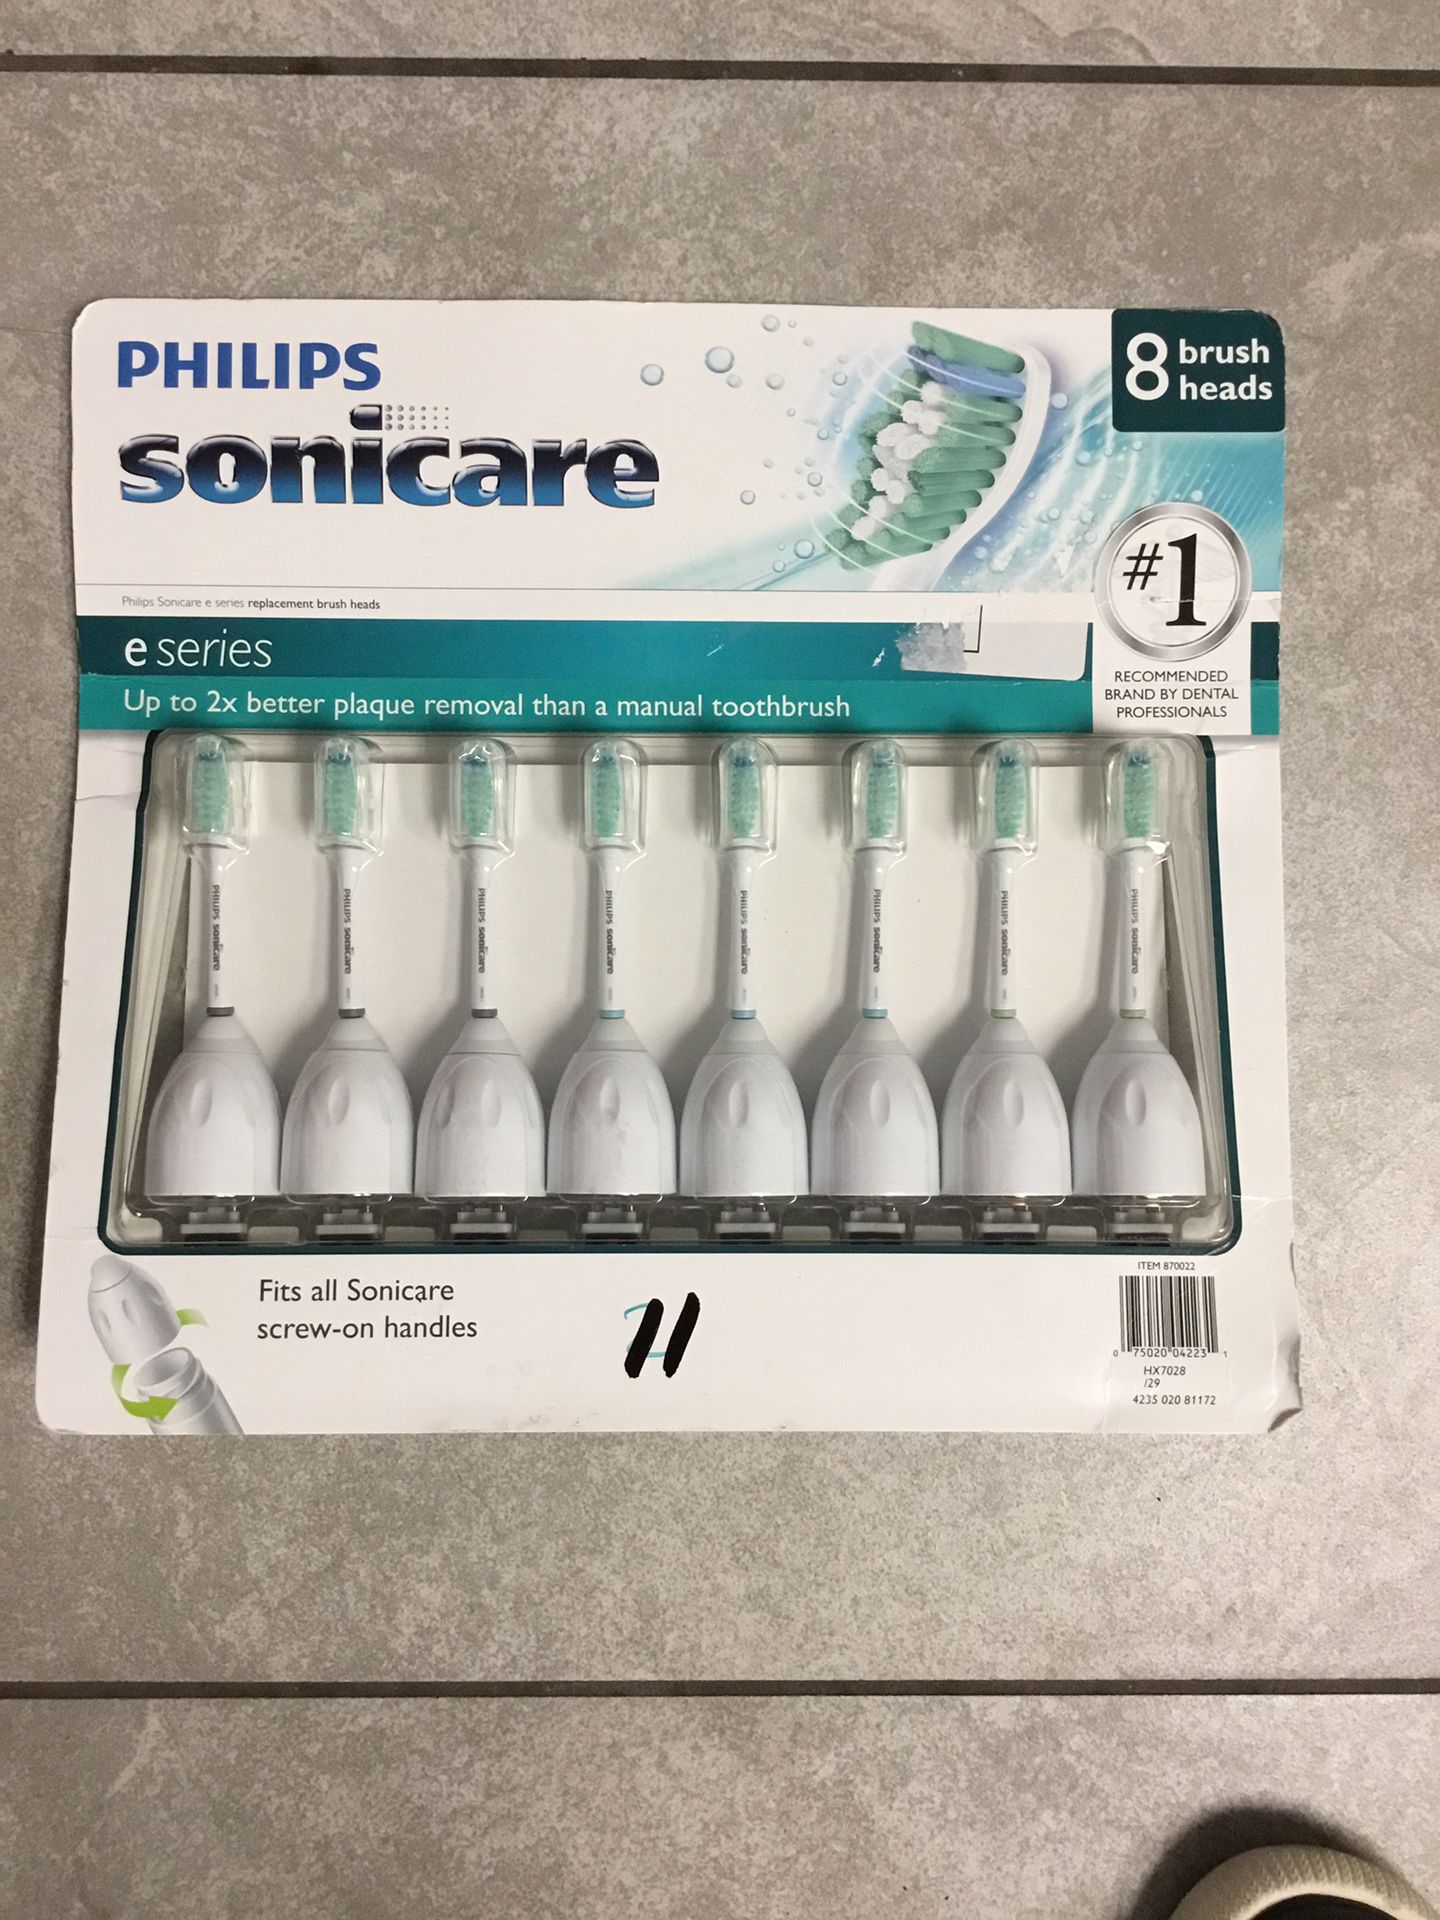 Phillips Sonicare Toothbrush E Series Heads - 8 Pack